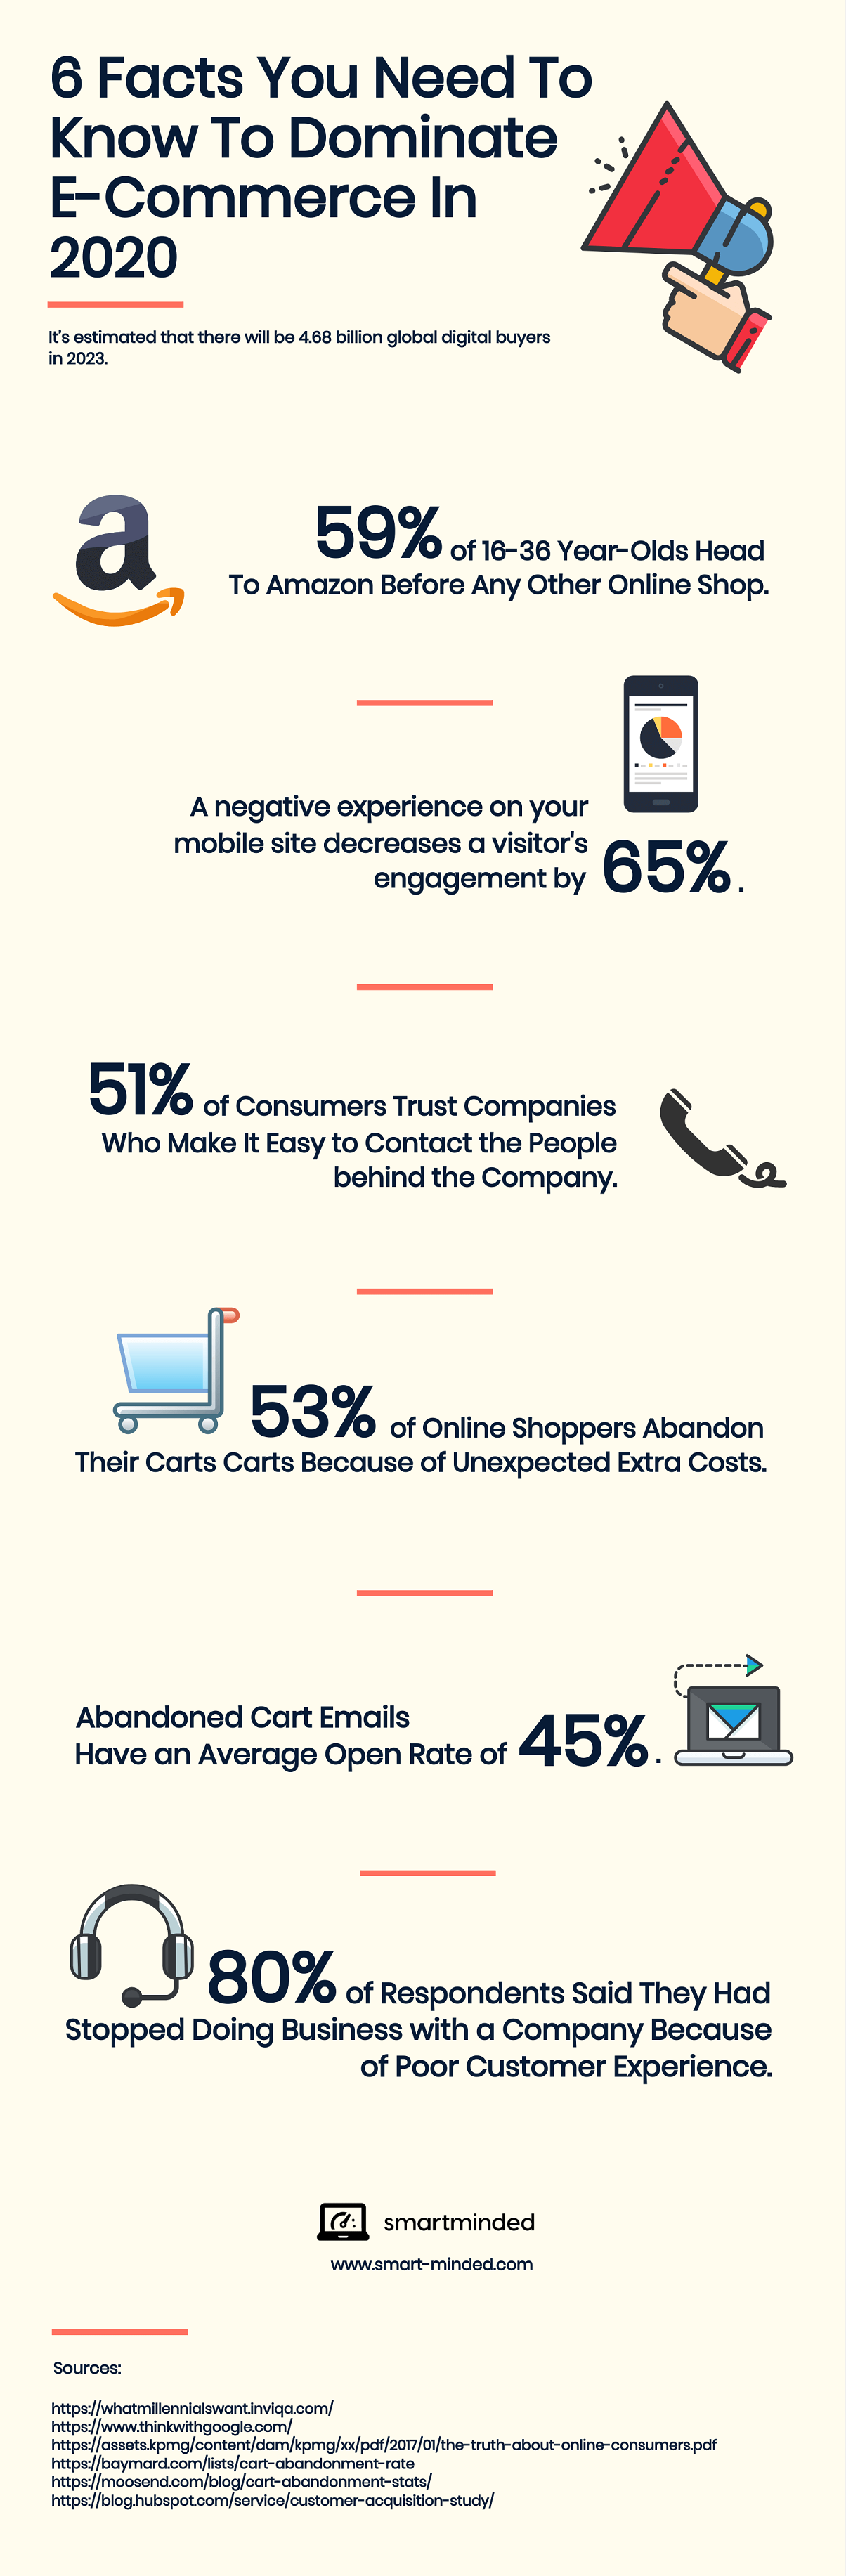 6 Facts You Need to Know to Dominate e-Commerce in 2020 #infographic